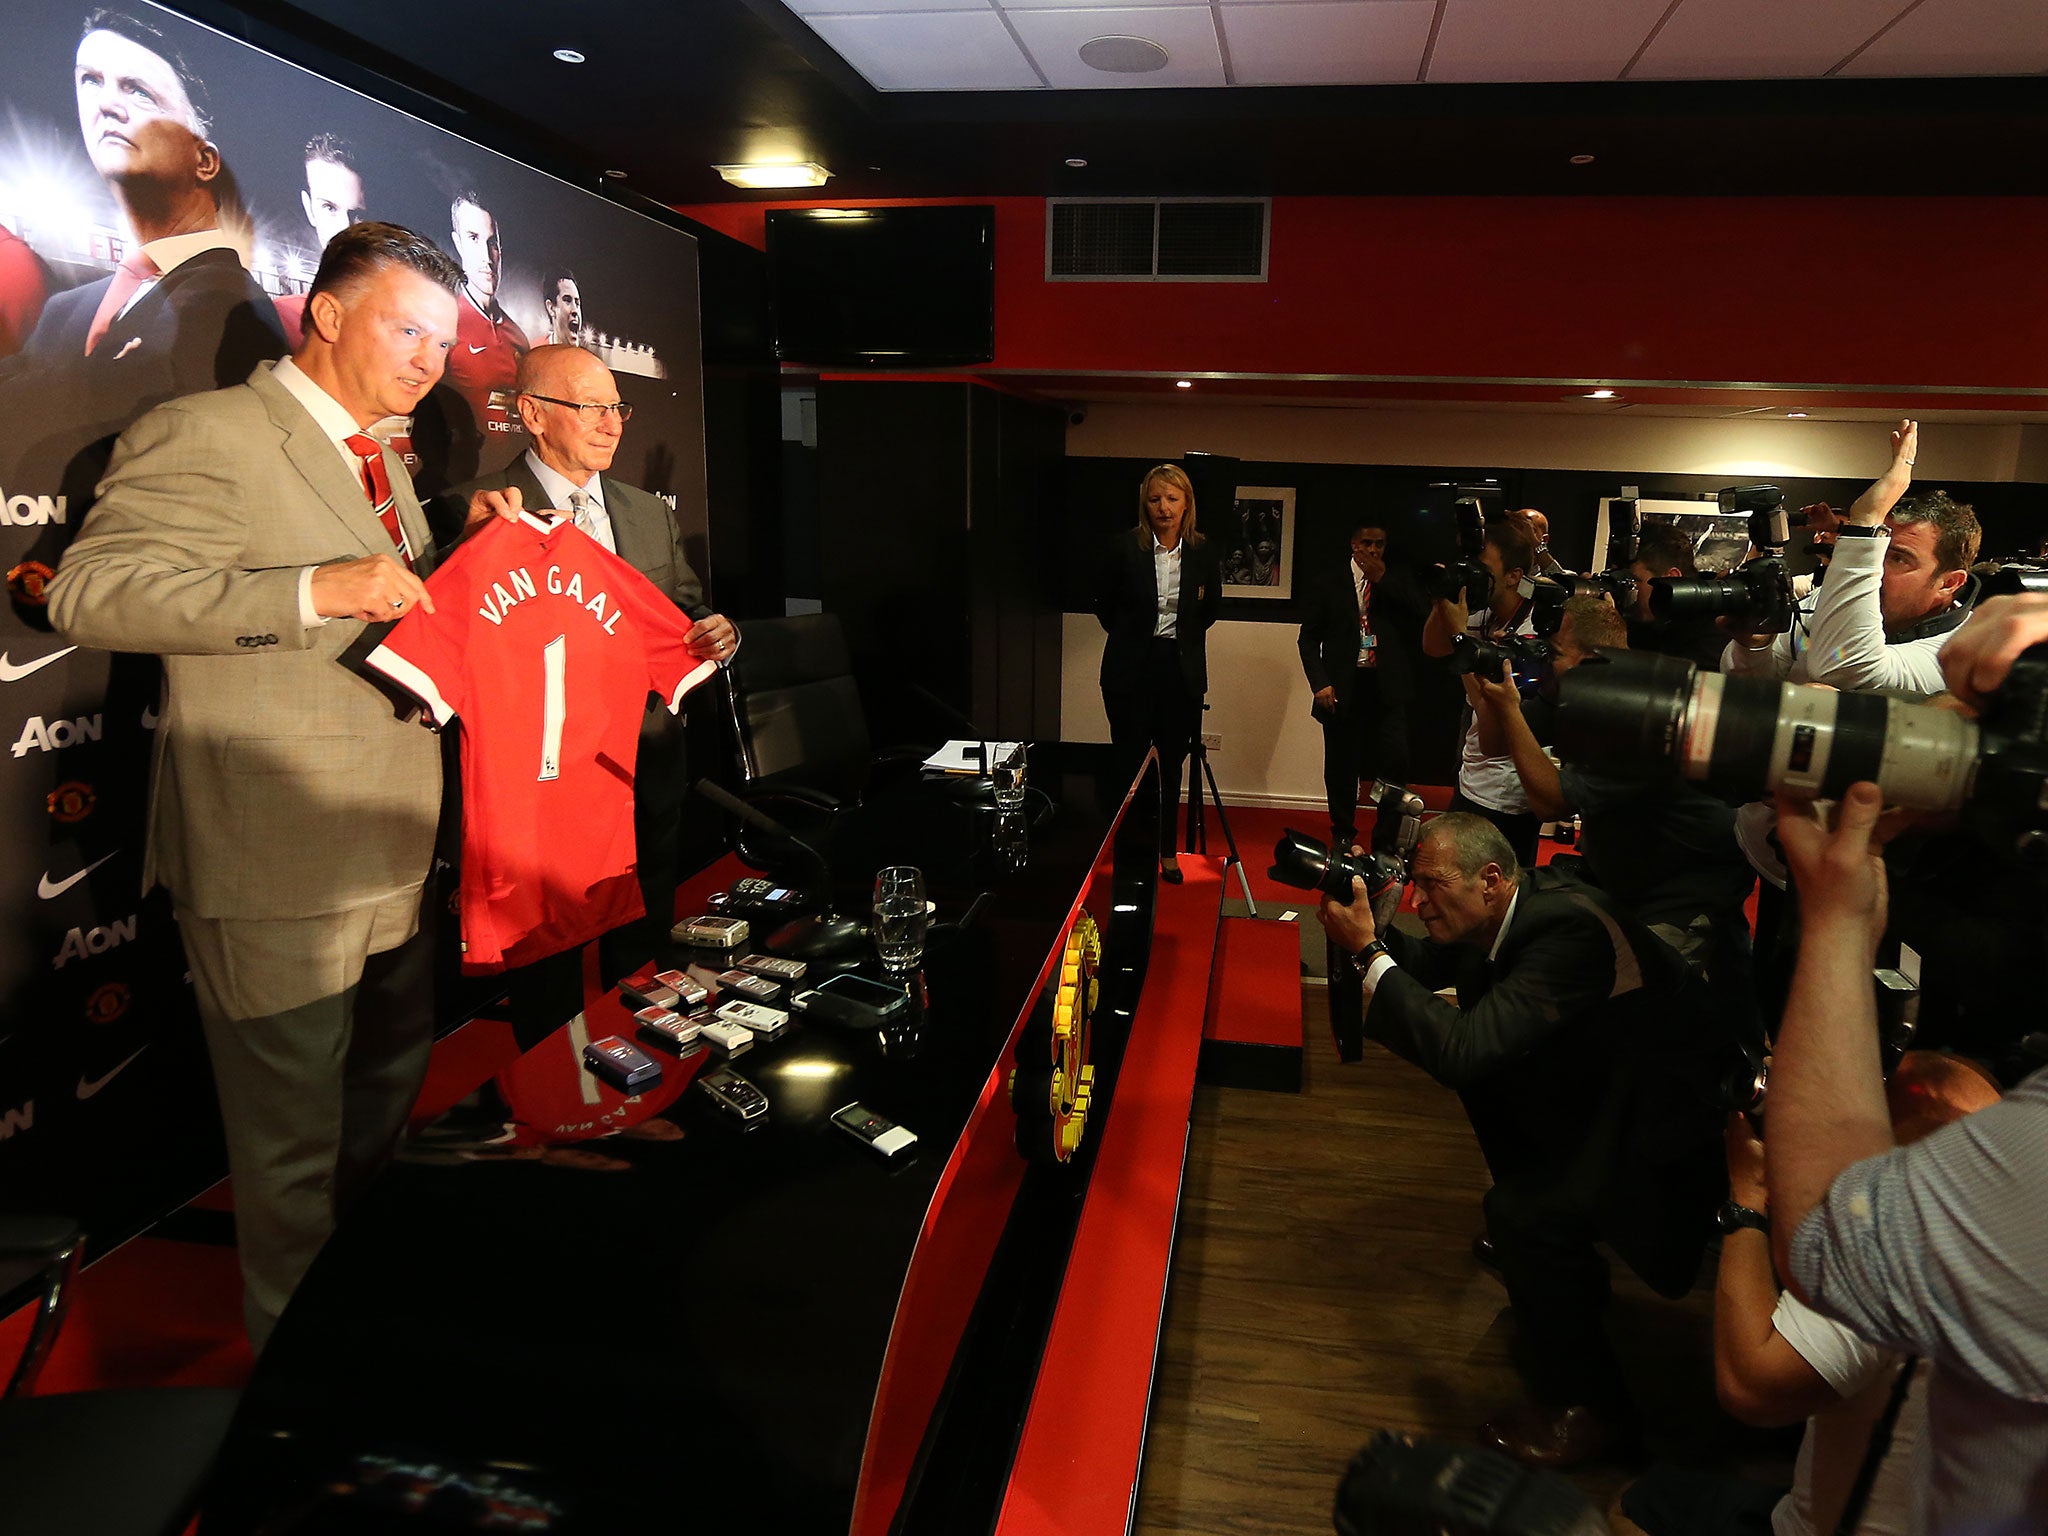 Louis van Gaal is presented as the new manager of Manchester United